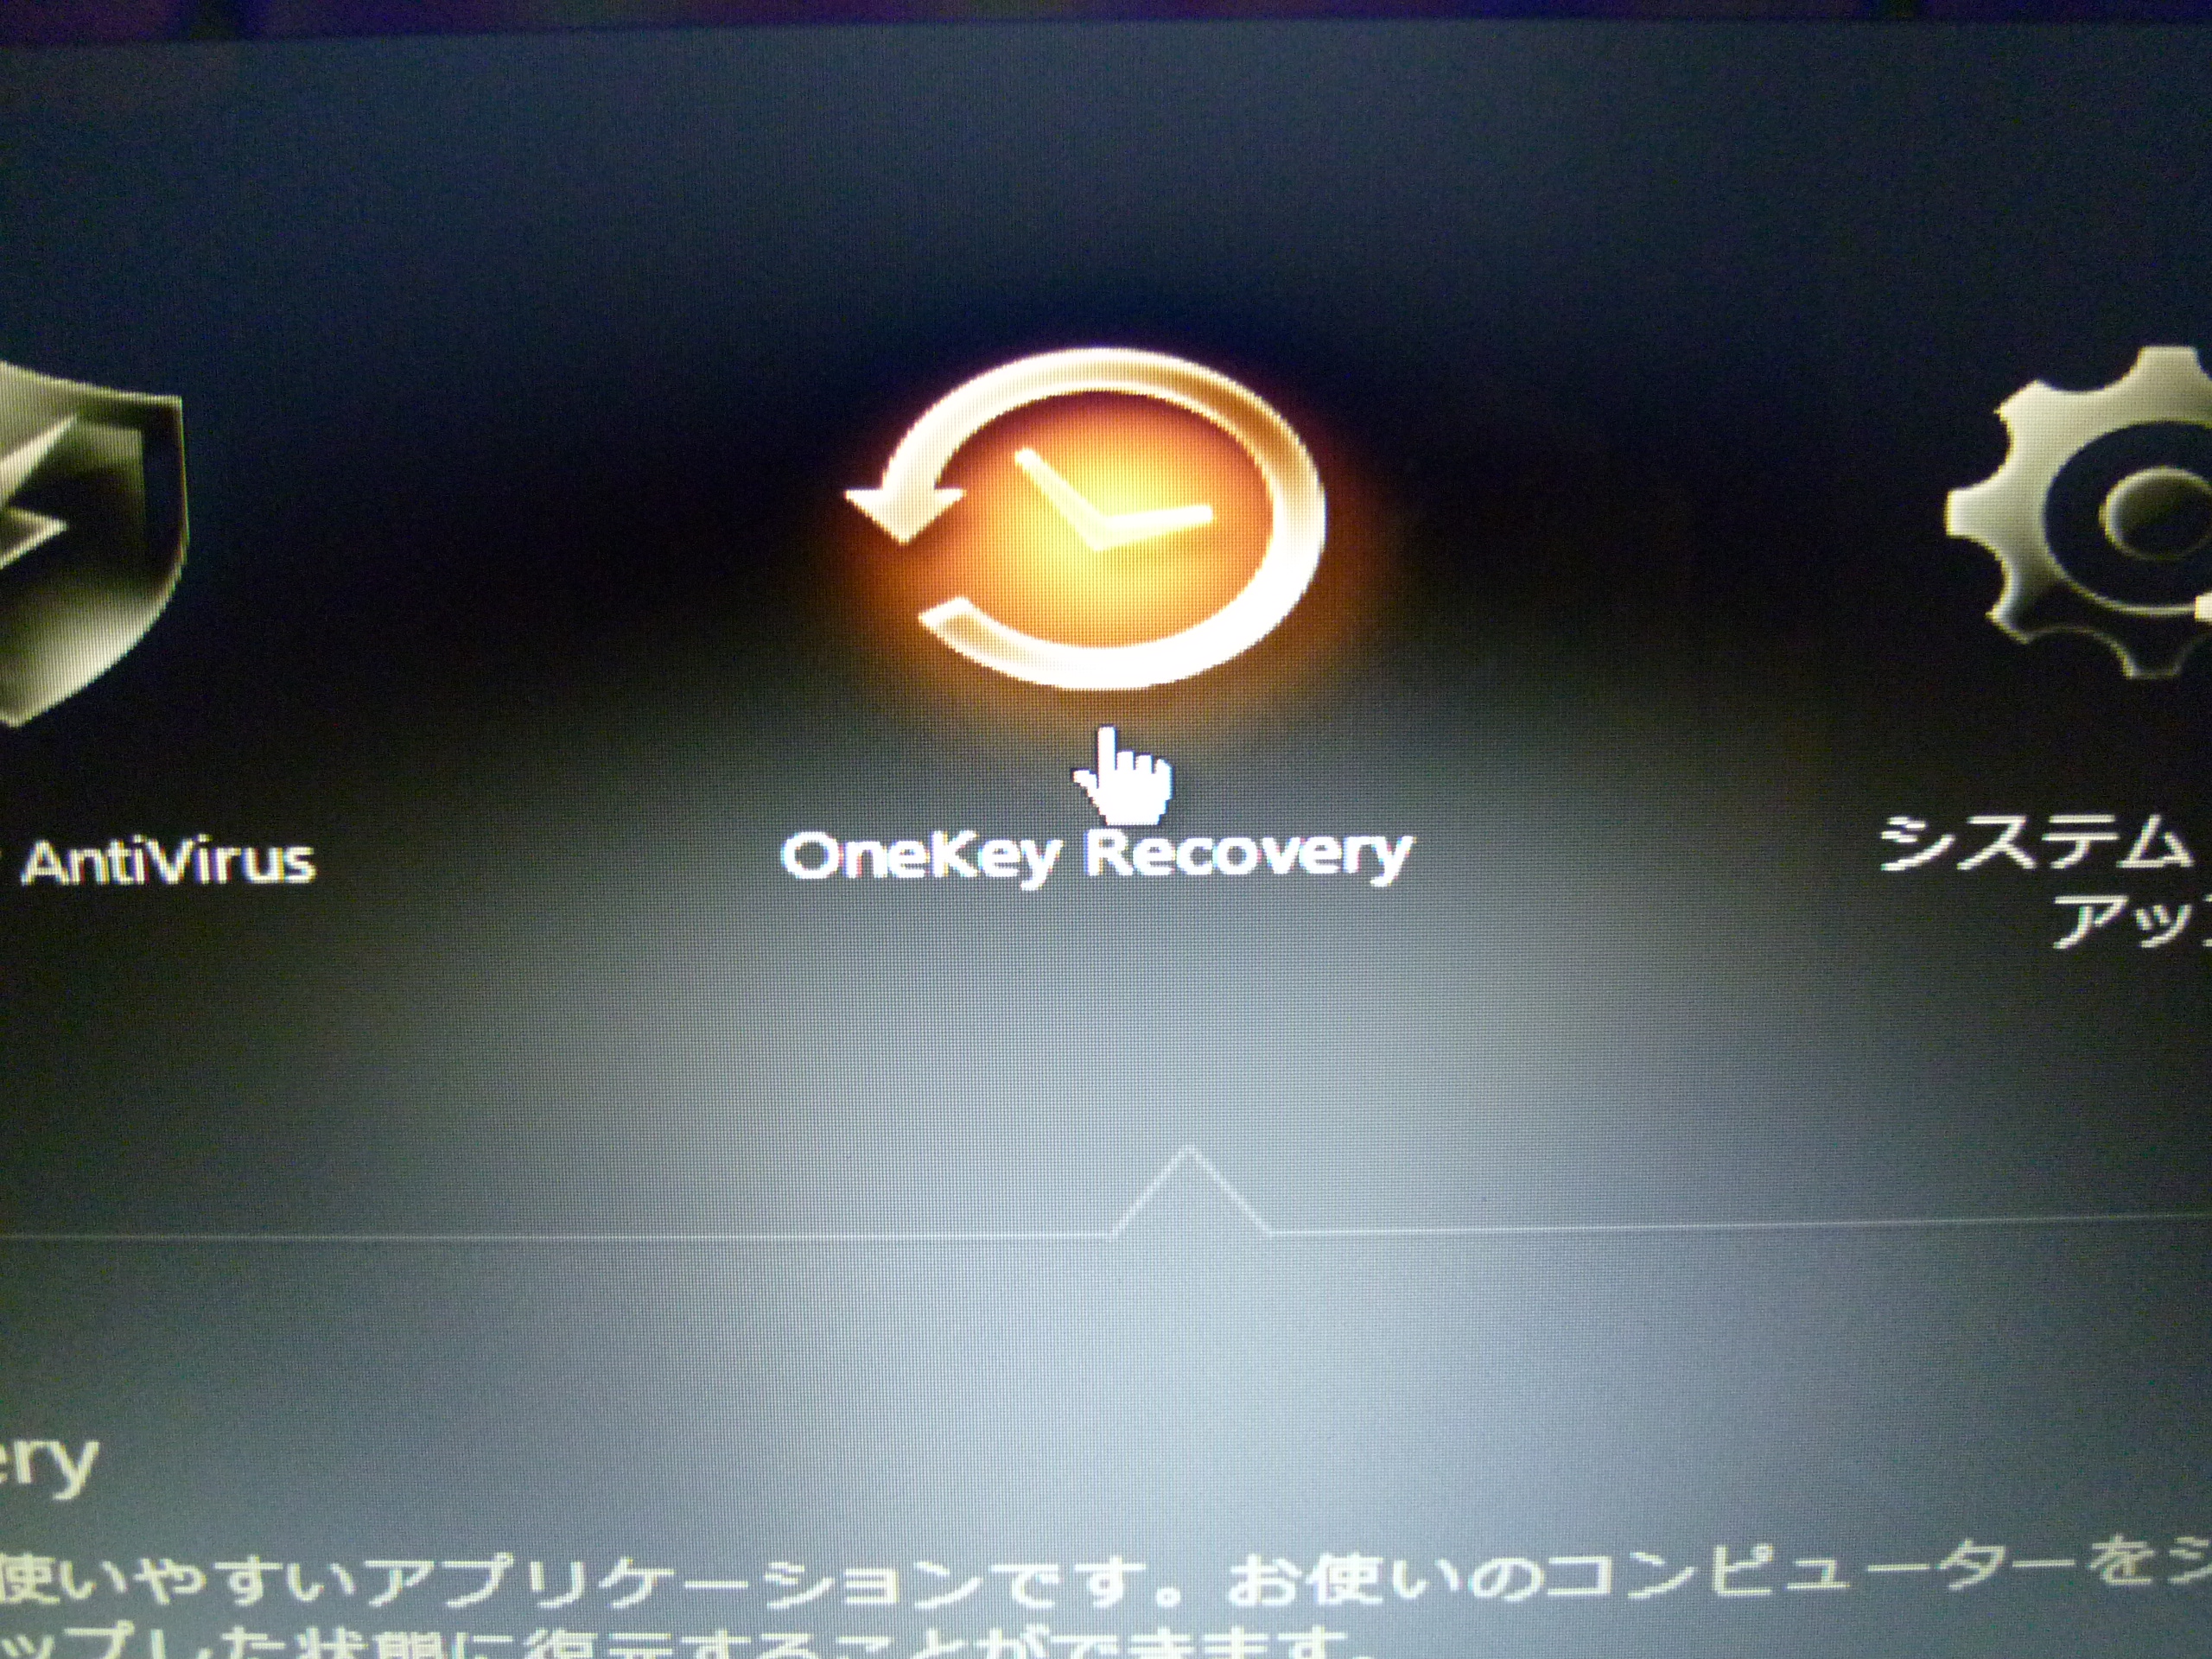 OneKey Recoveryを選択